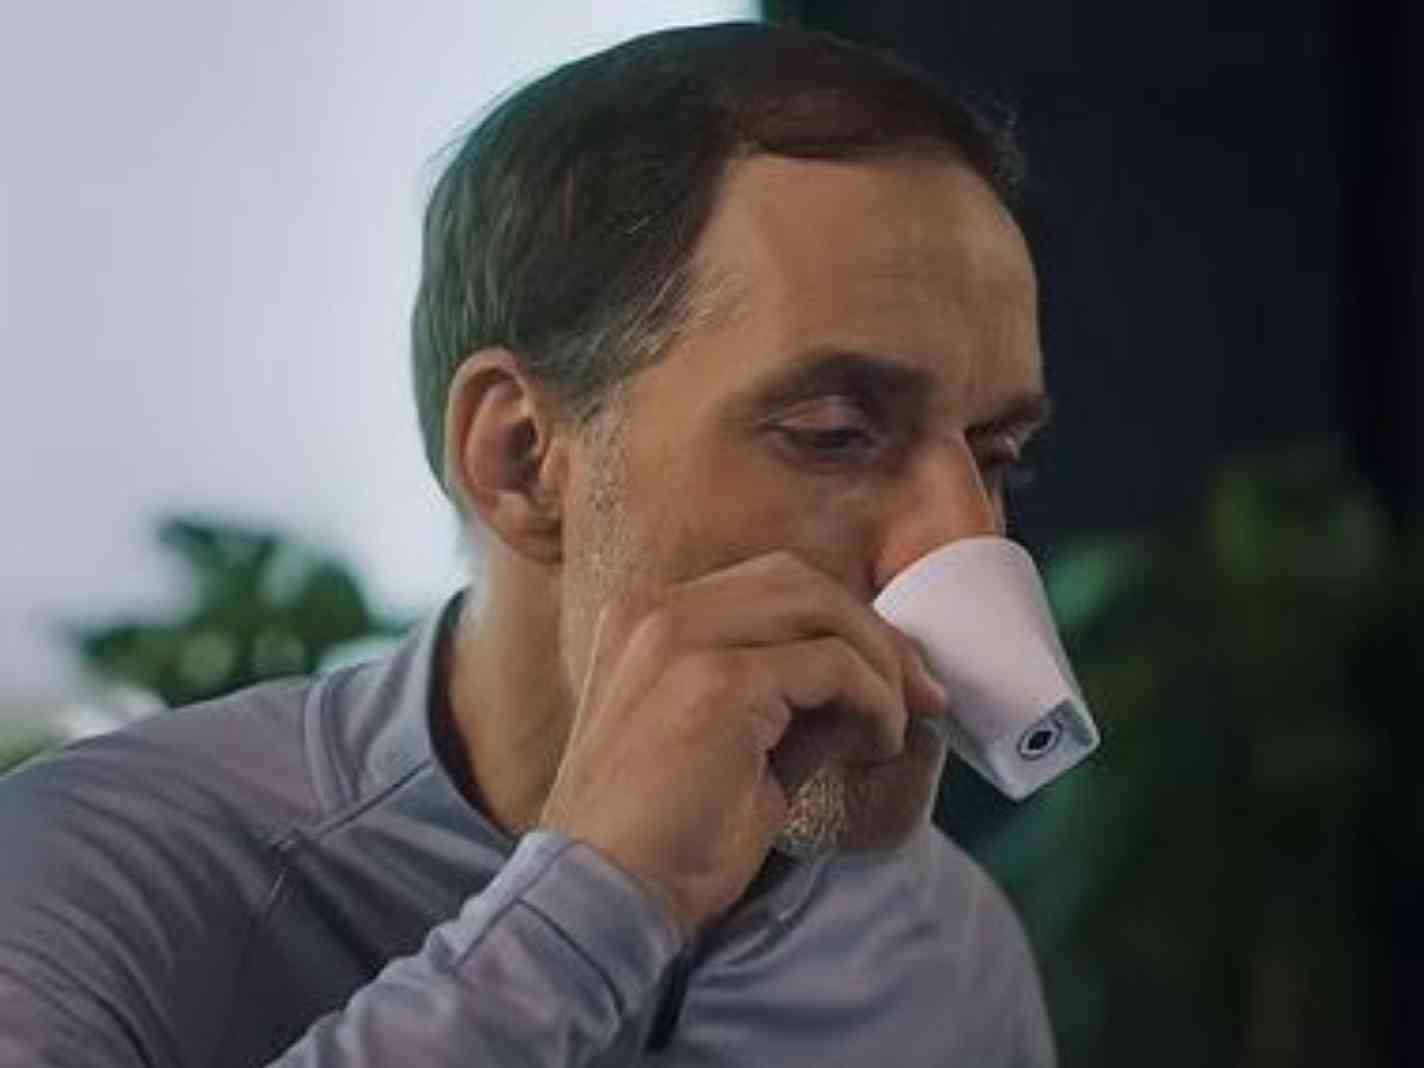 Chelsea boss Thomas Tuchel showcases his acting chops in new Trivago advert